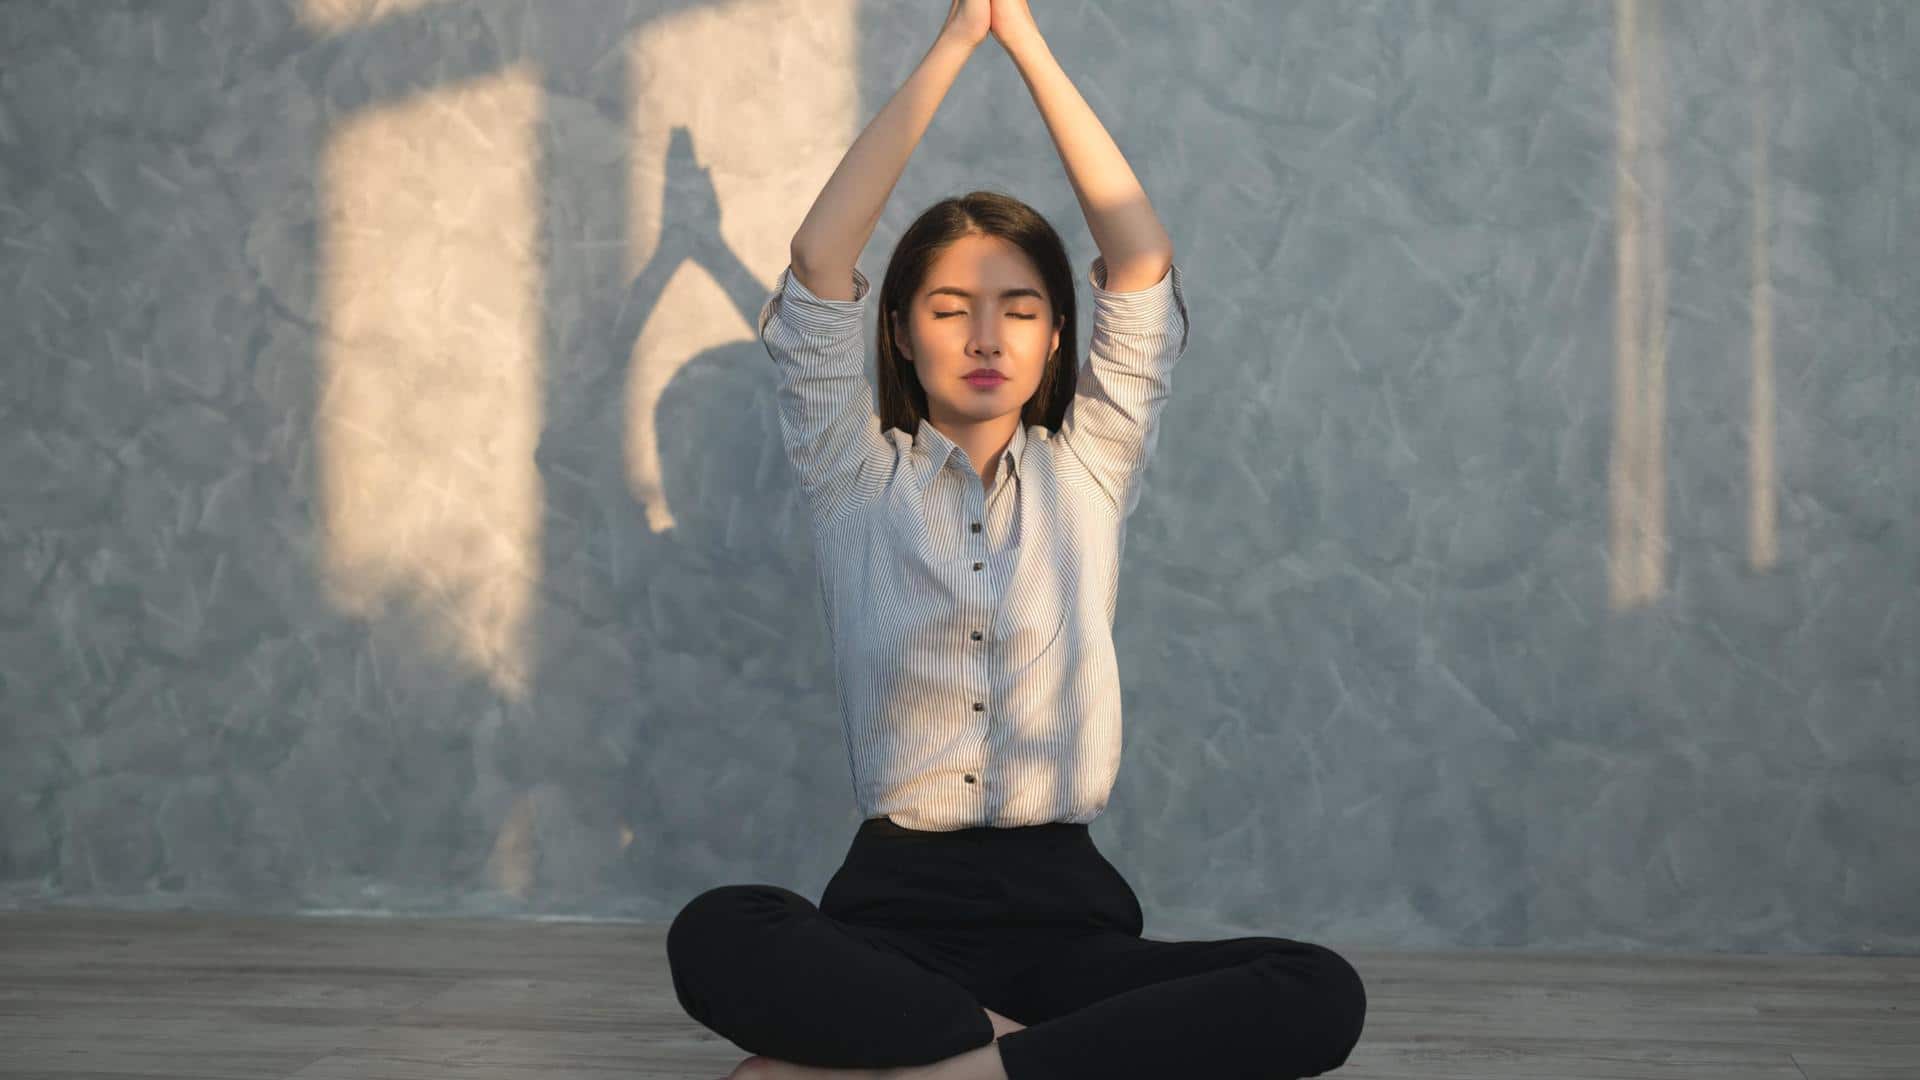 Expert reveals how yoga at workplace can help employees